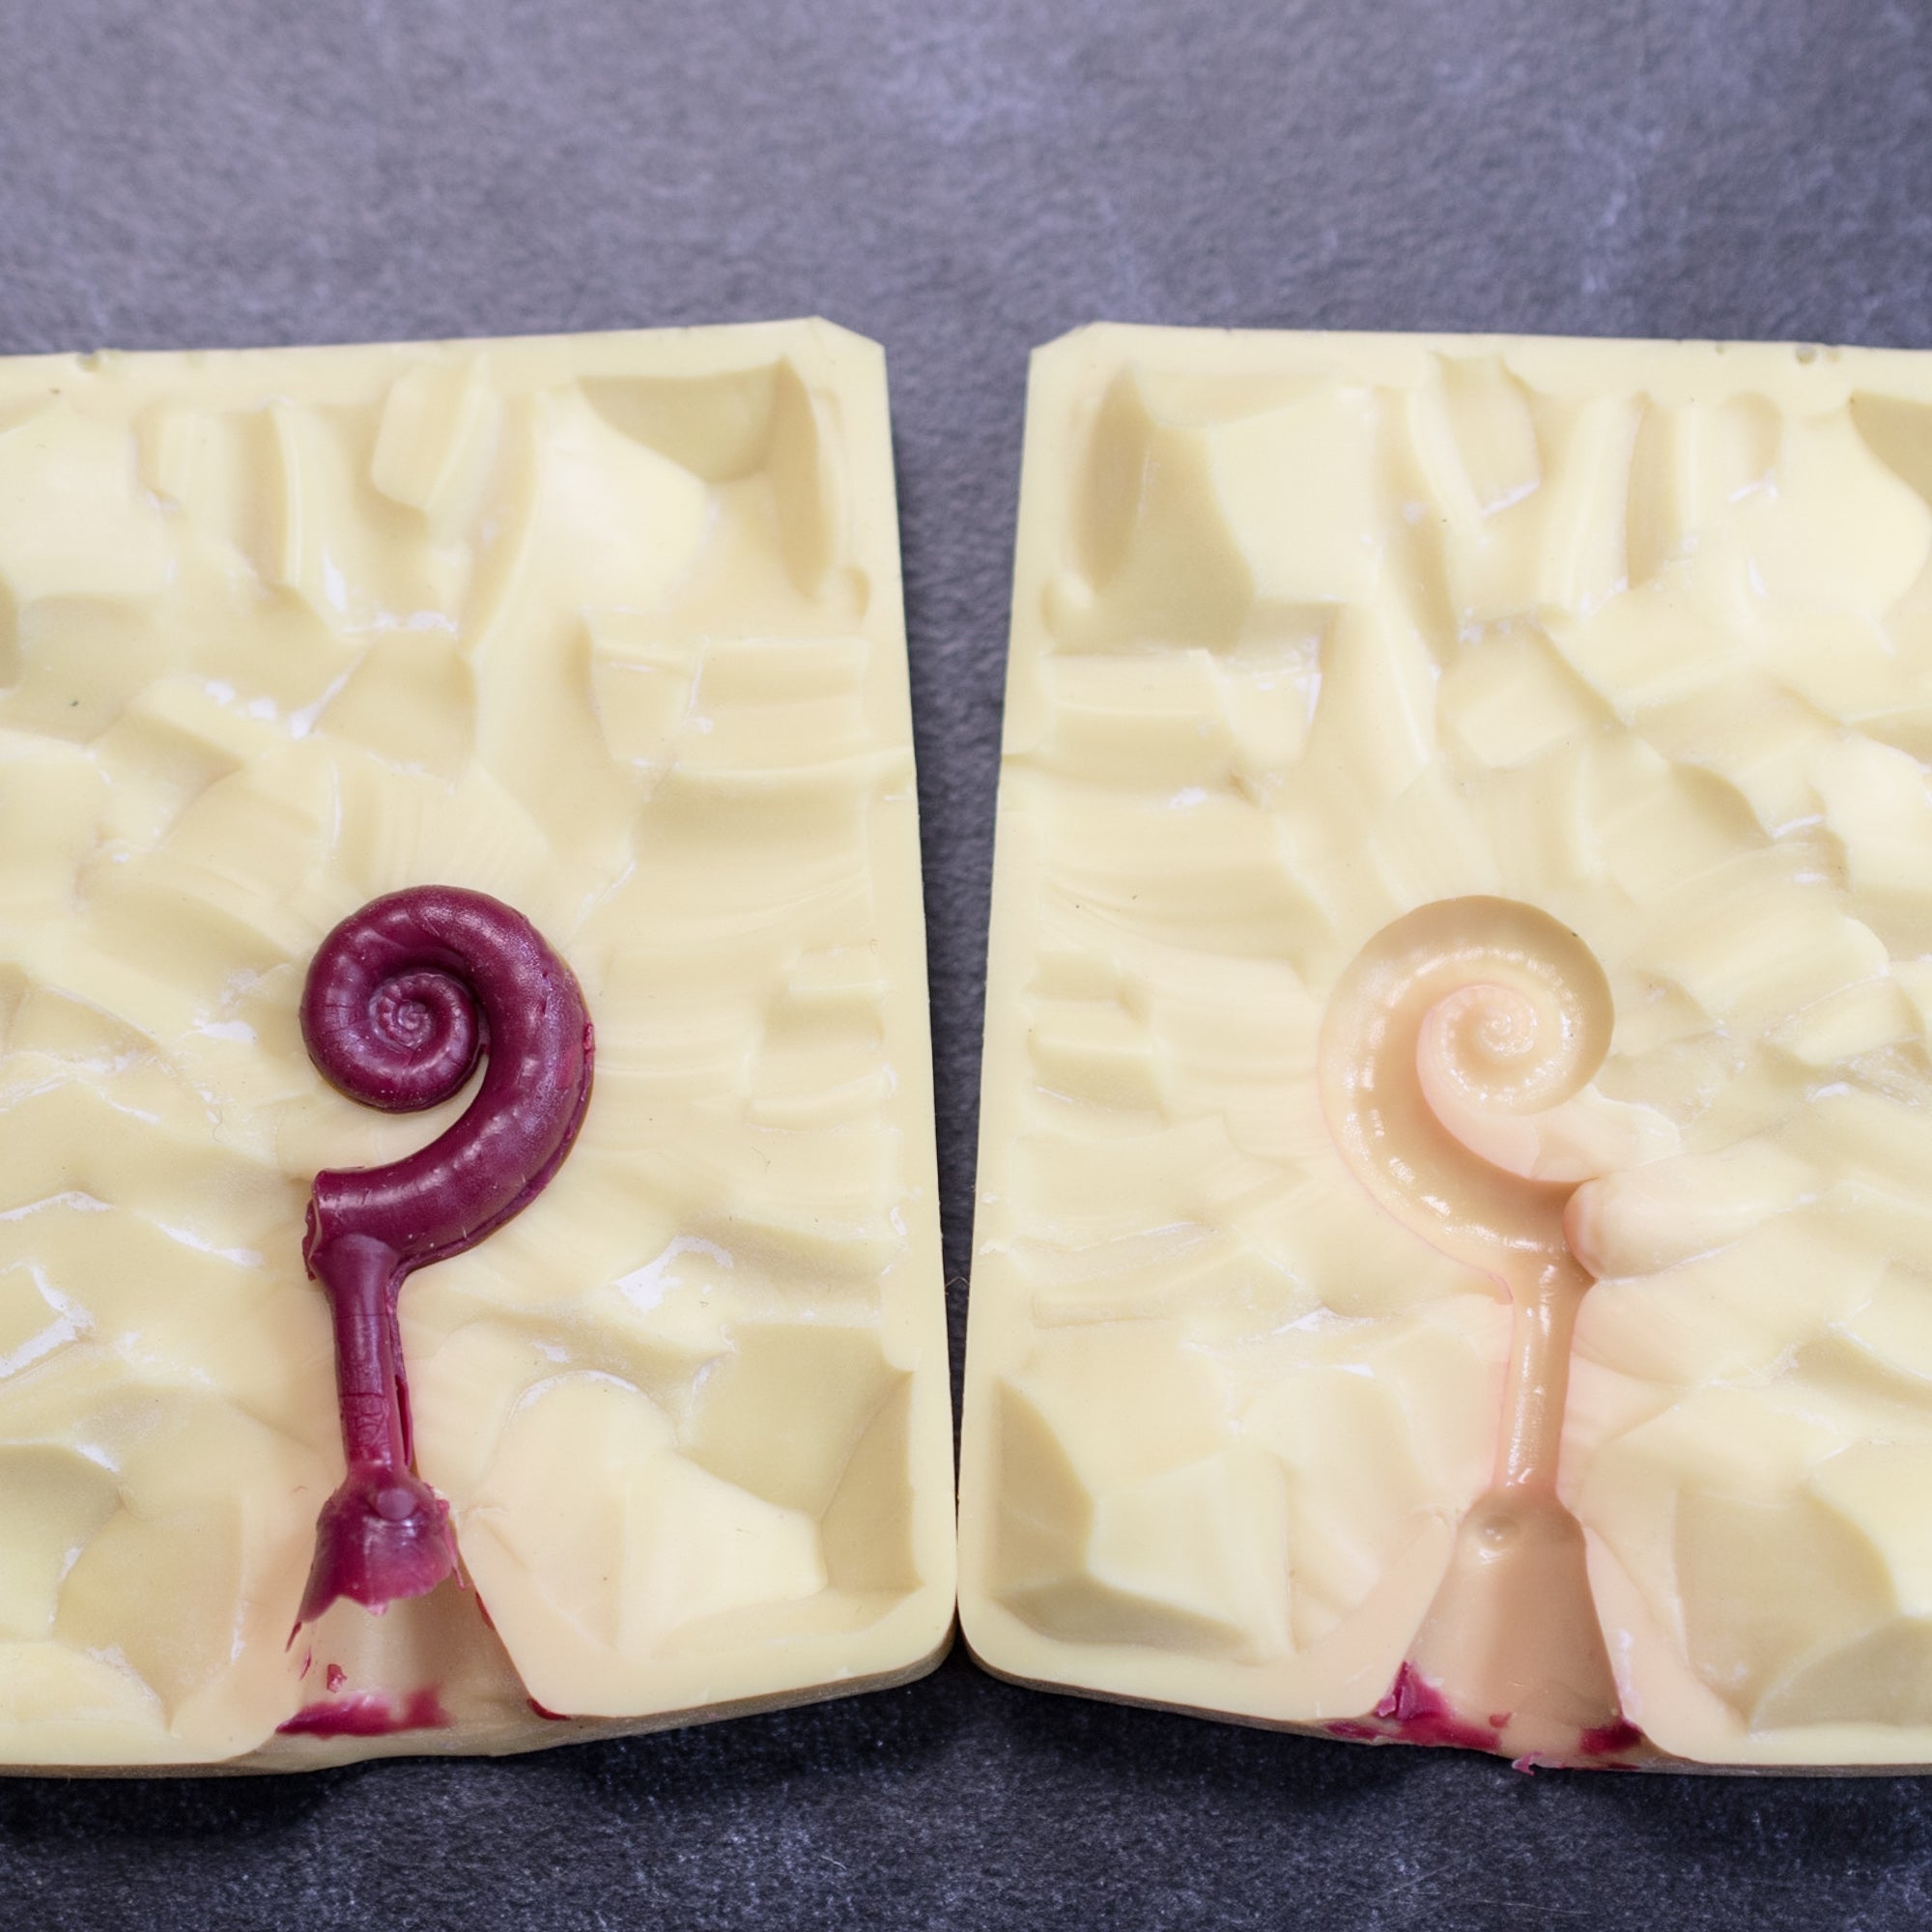 yellow silicone mold of rams horn squid shell for jewelry making showing wax cast